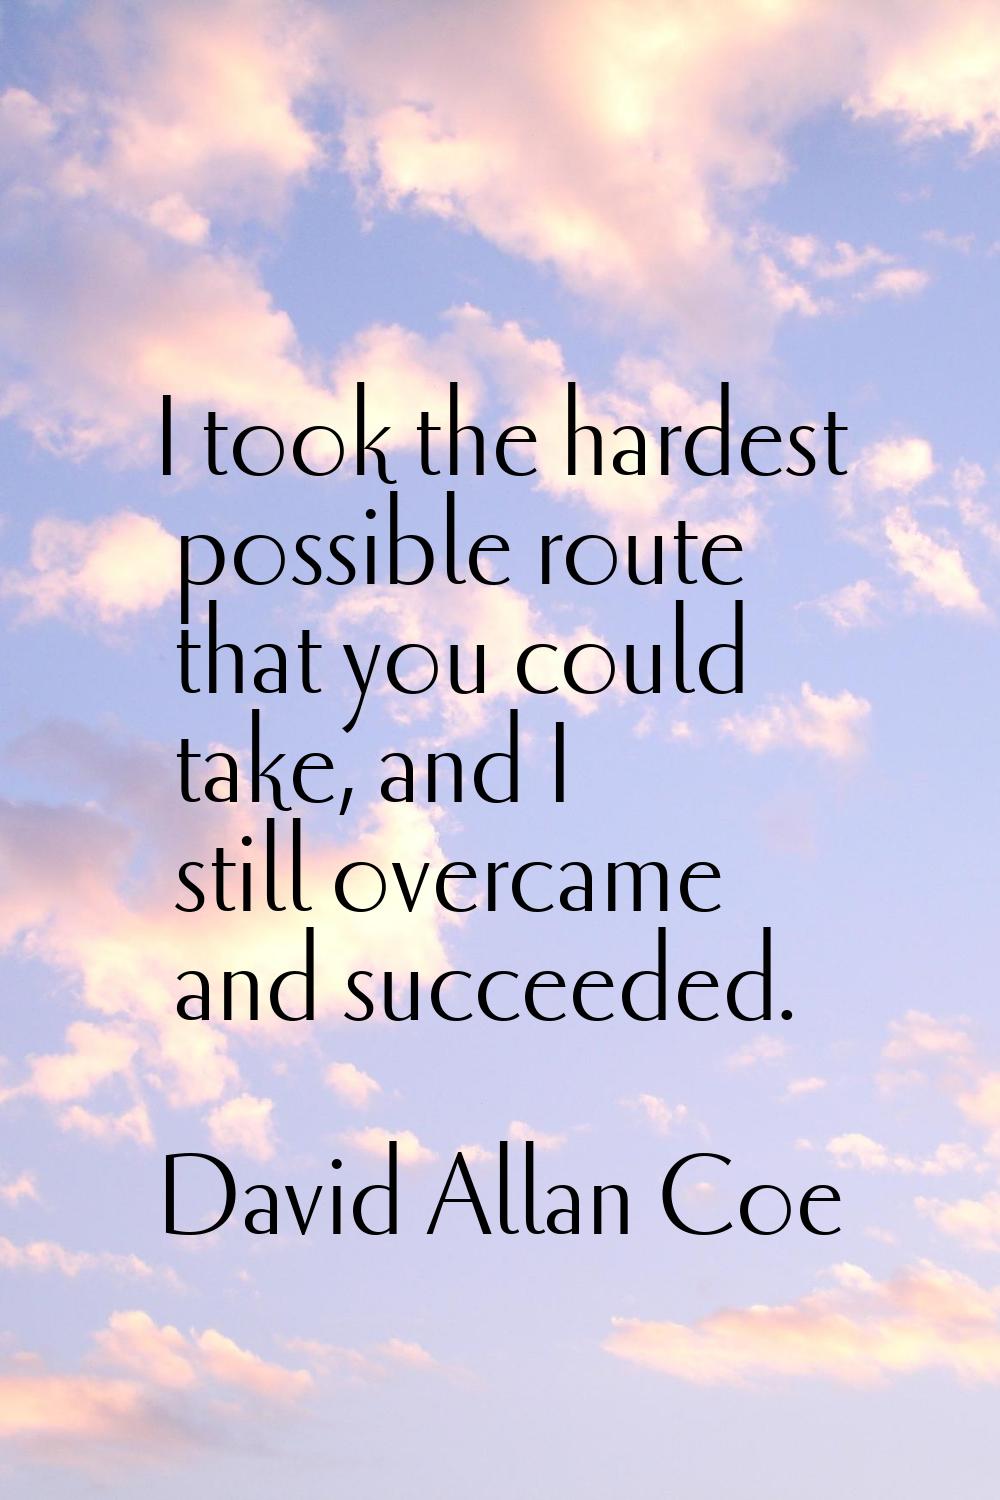 I took the hardest possible route that you could take, and I still overcame and succeeded.